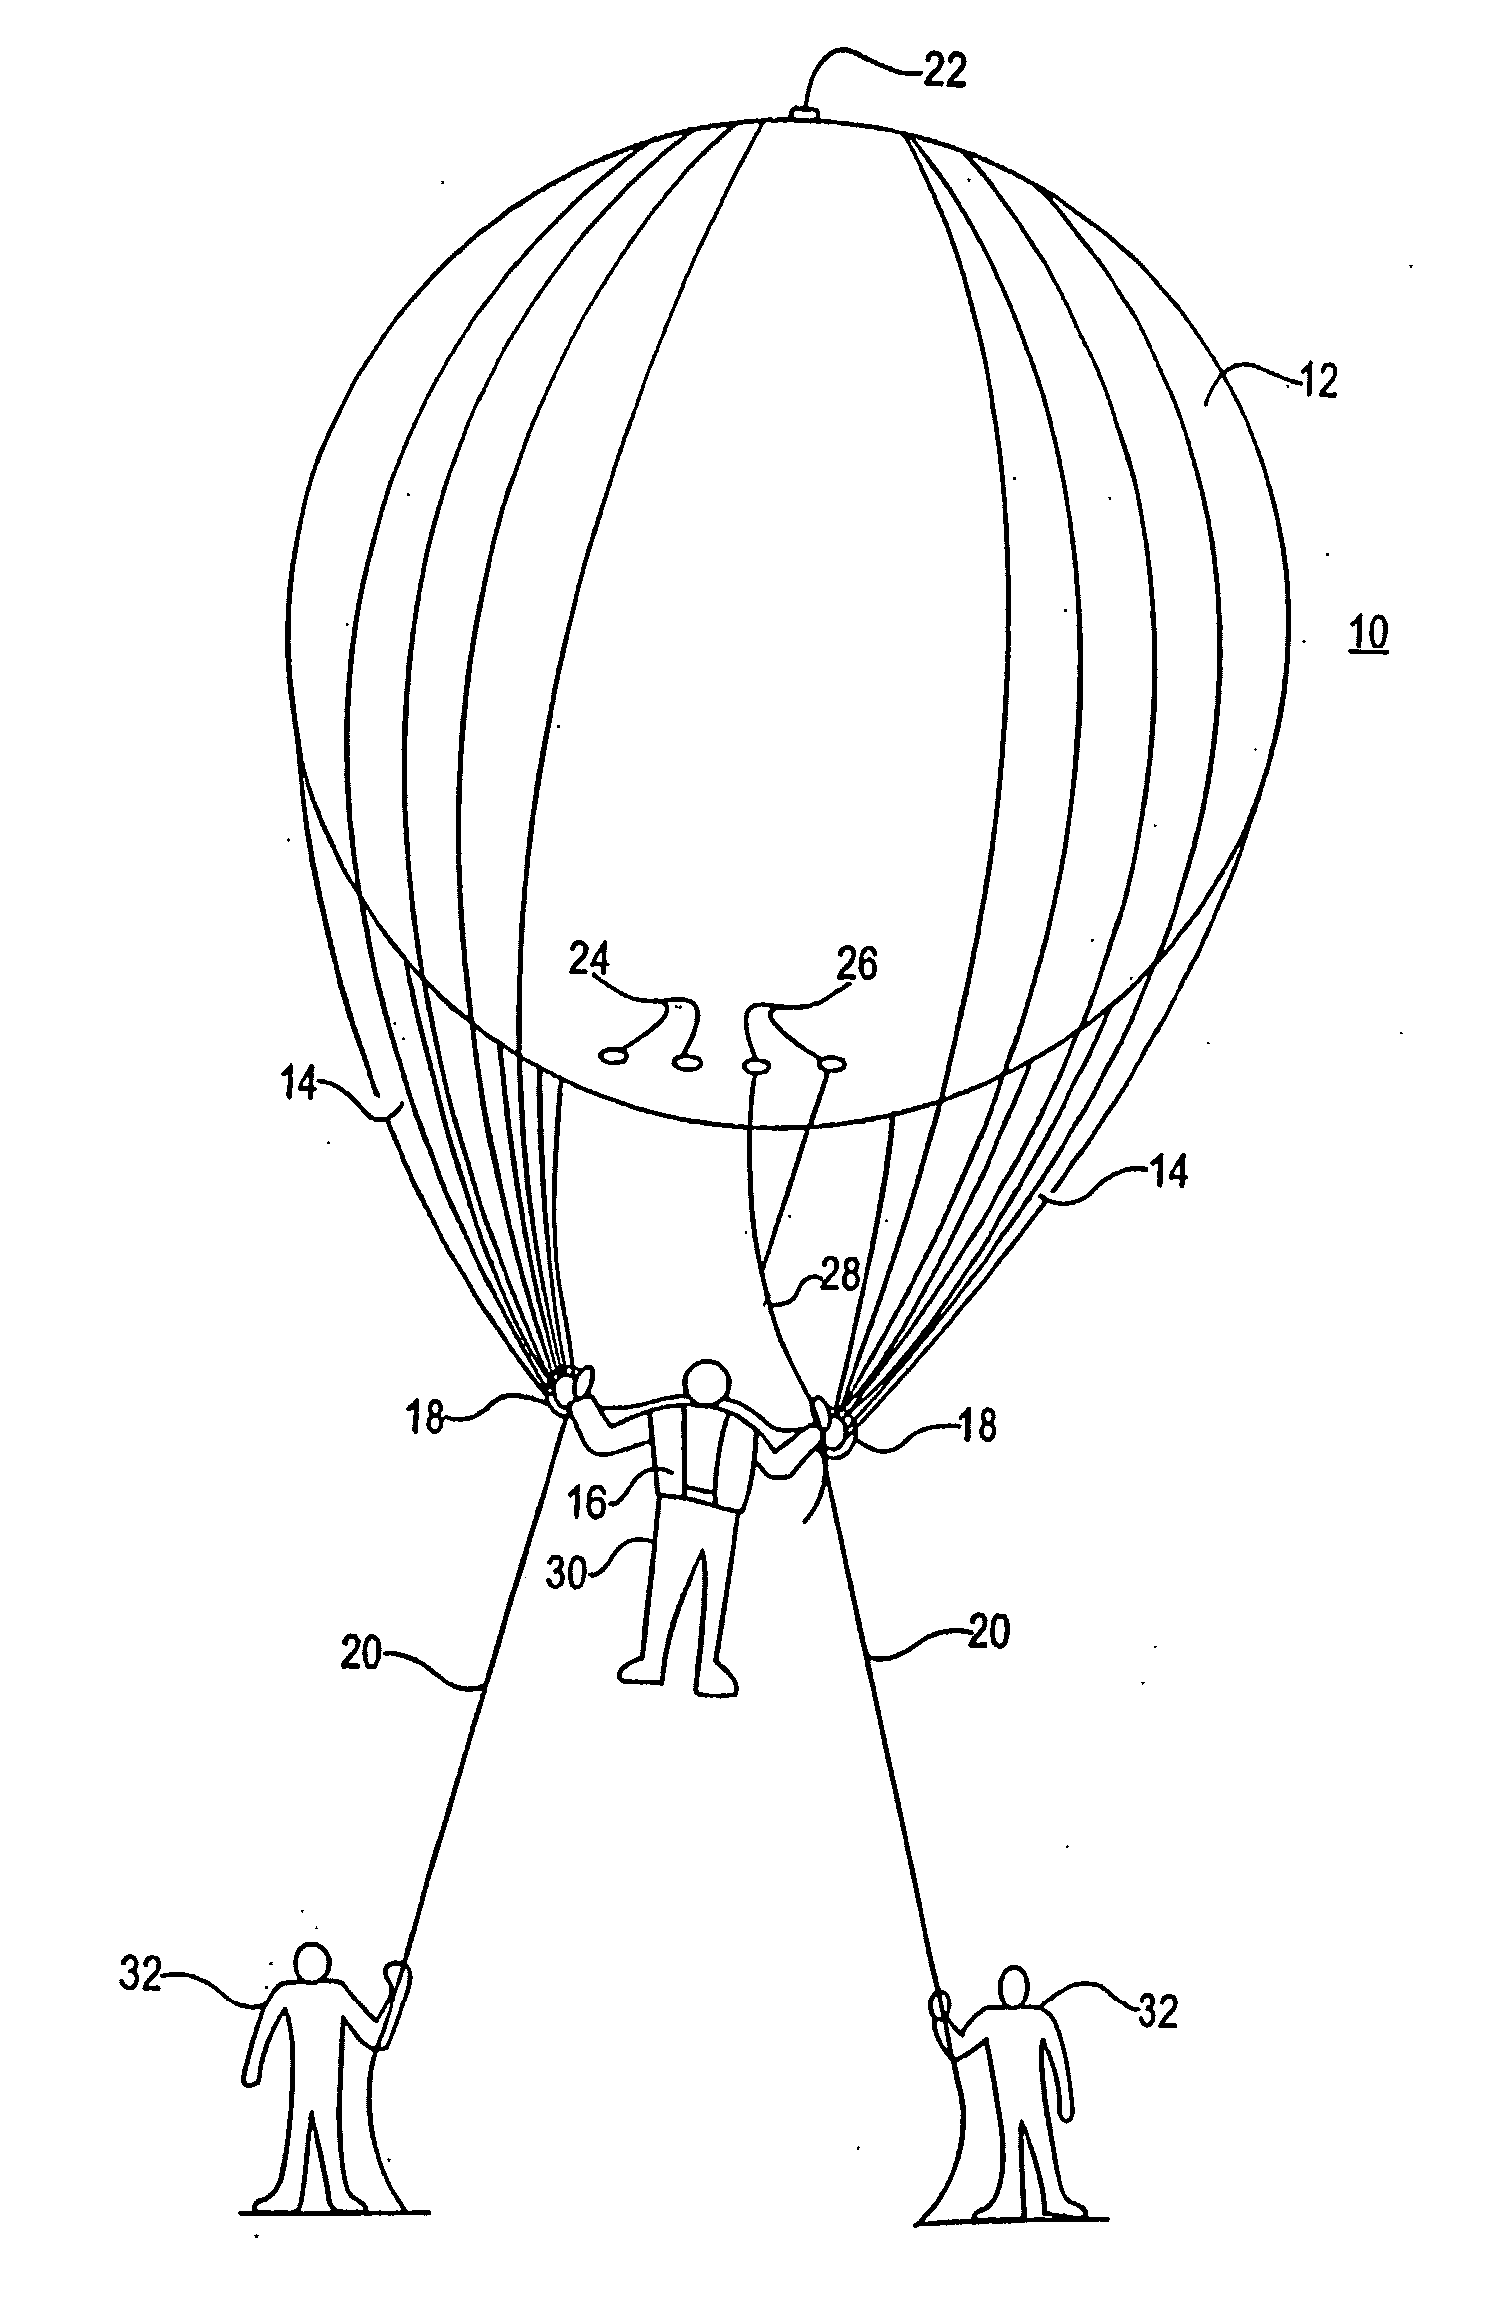 System and apparatus for propelling and carrying a user within a confined interior